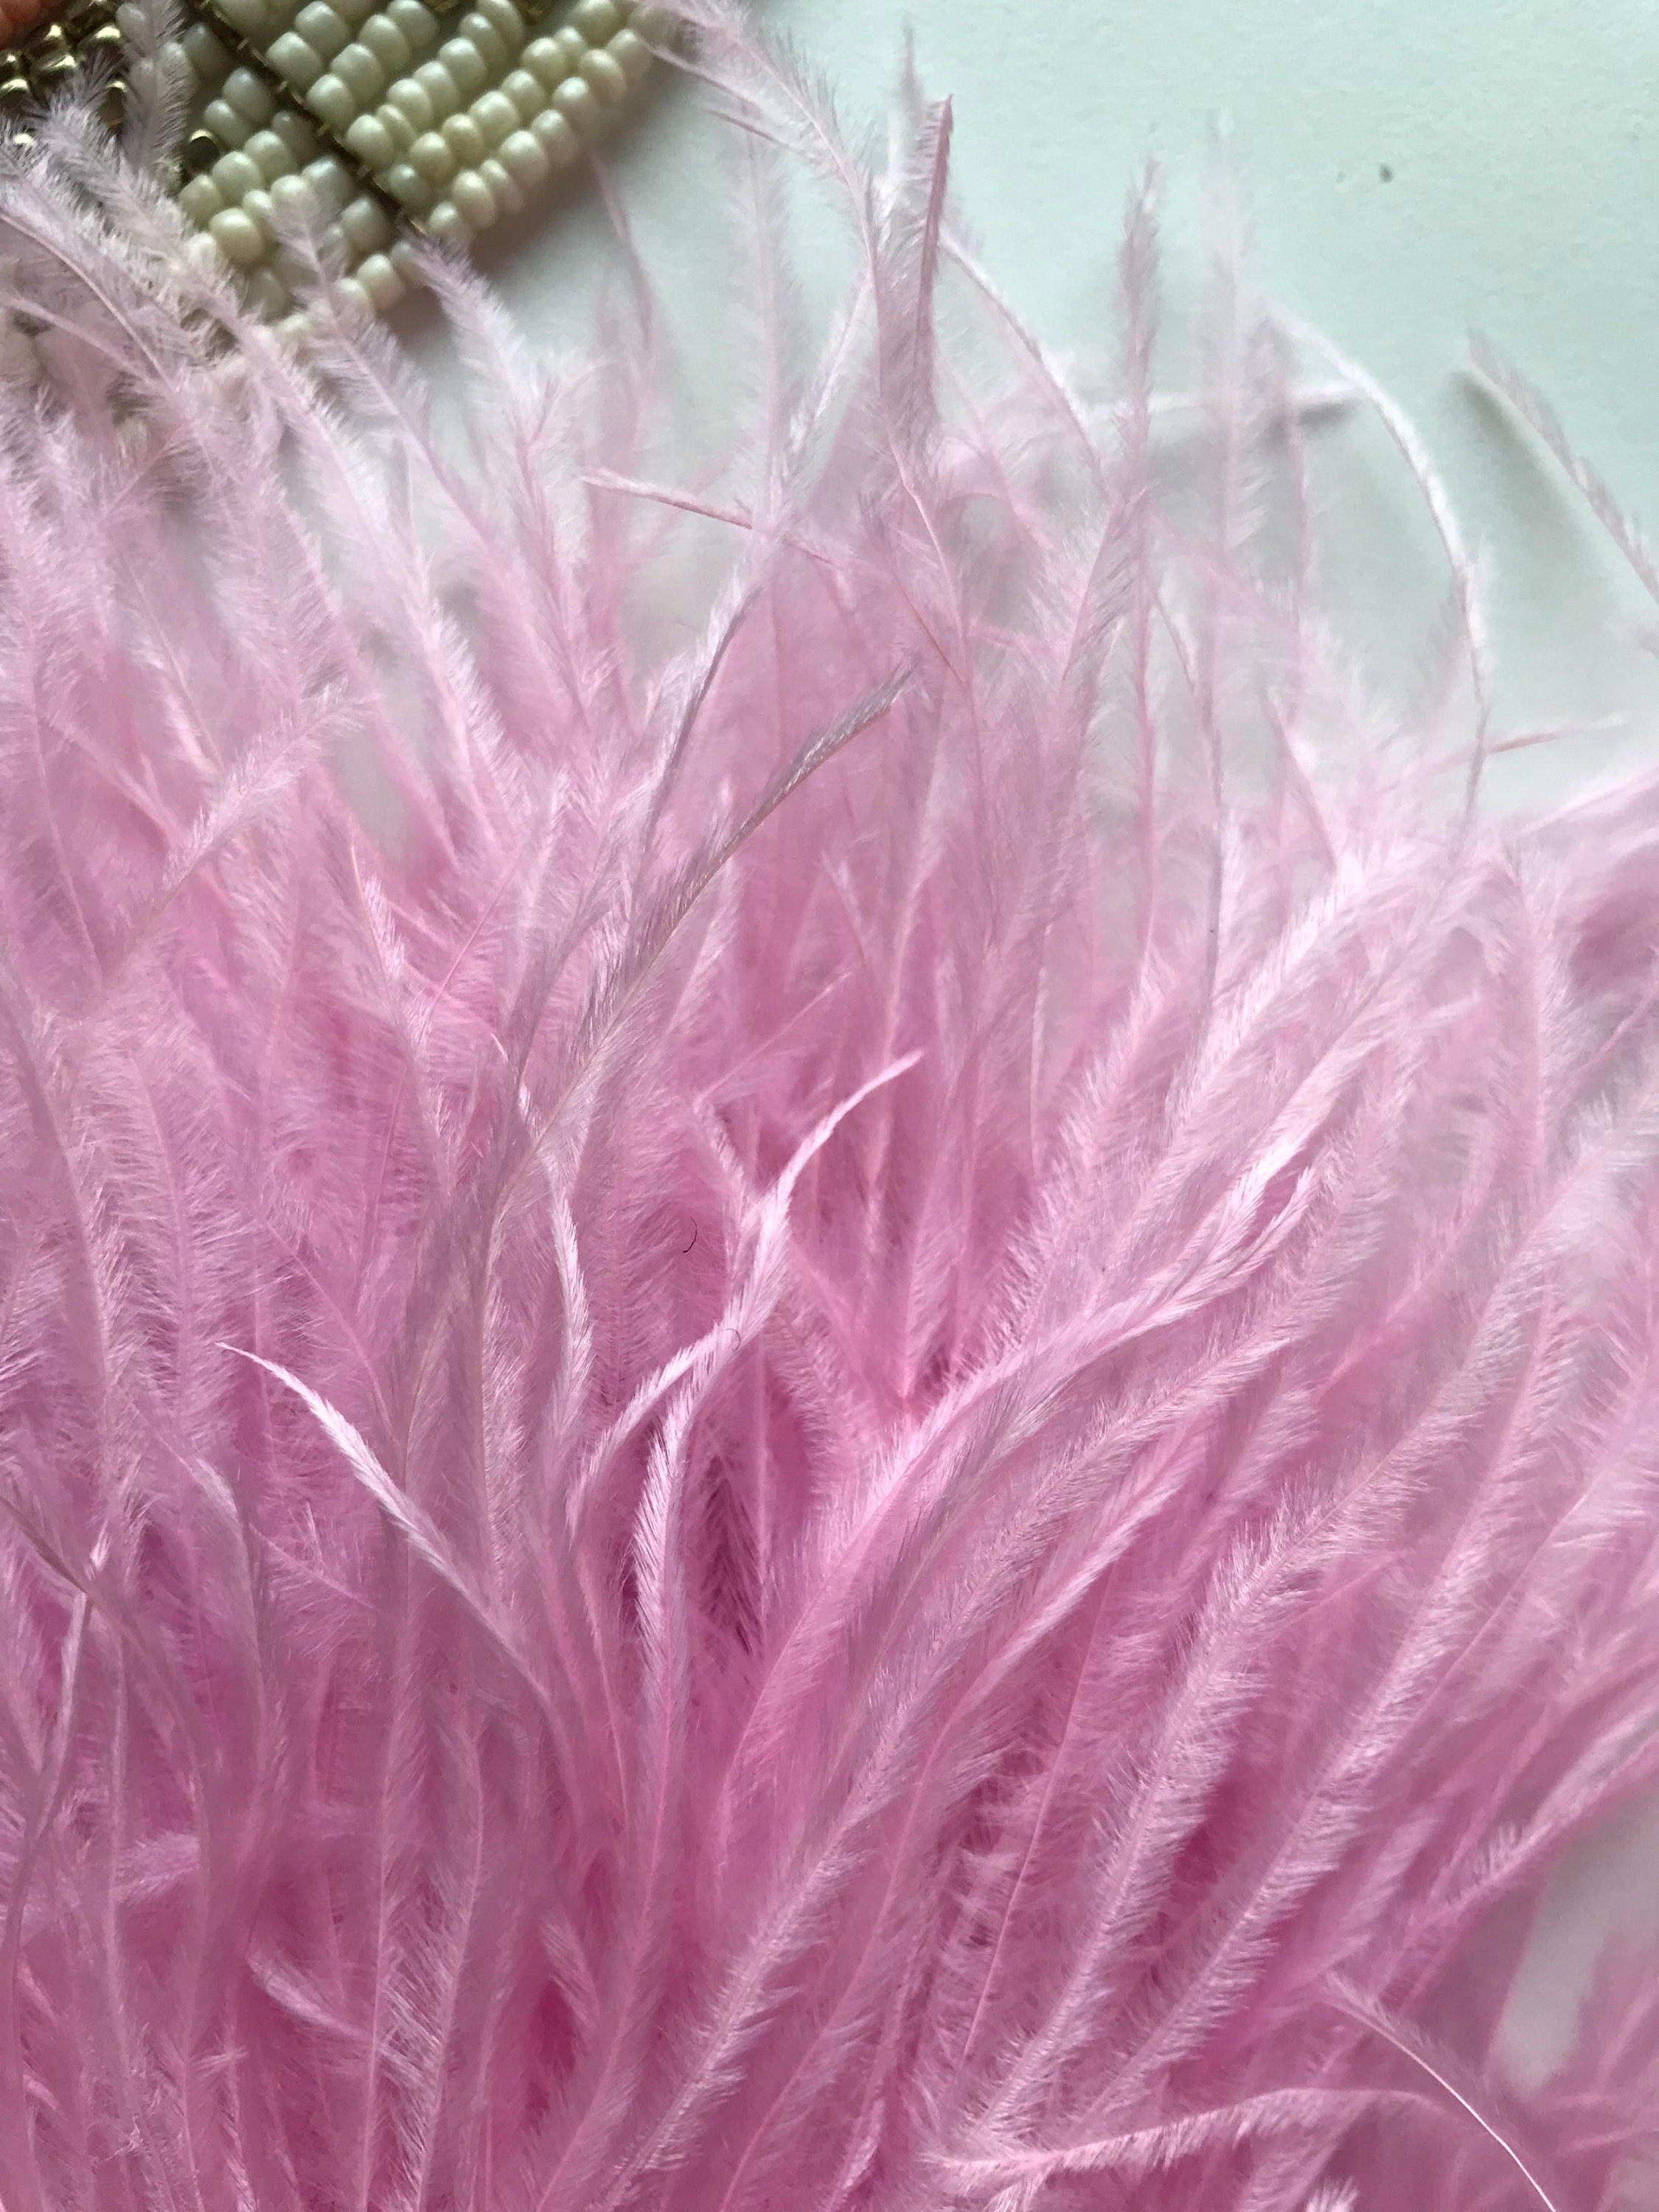 Large Wedding Feathers, 10 Pieces 19 24 Light Pink Ostrich Dyed Drabs Body  Feathers Party Centerpiece Costume Supplier : 2255 